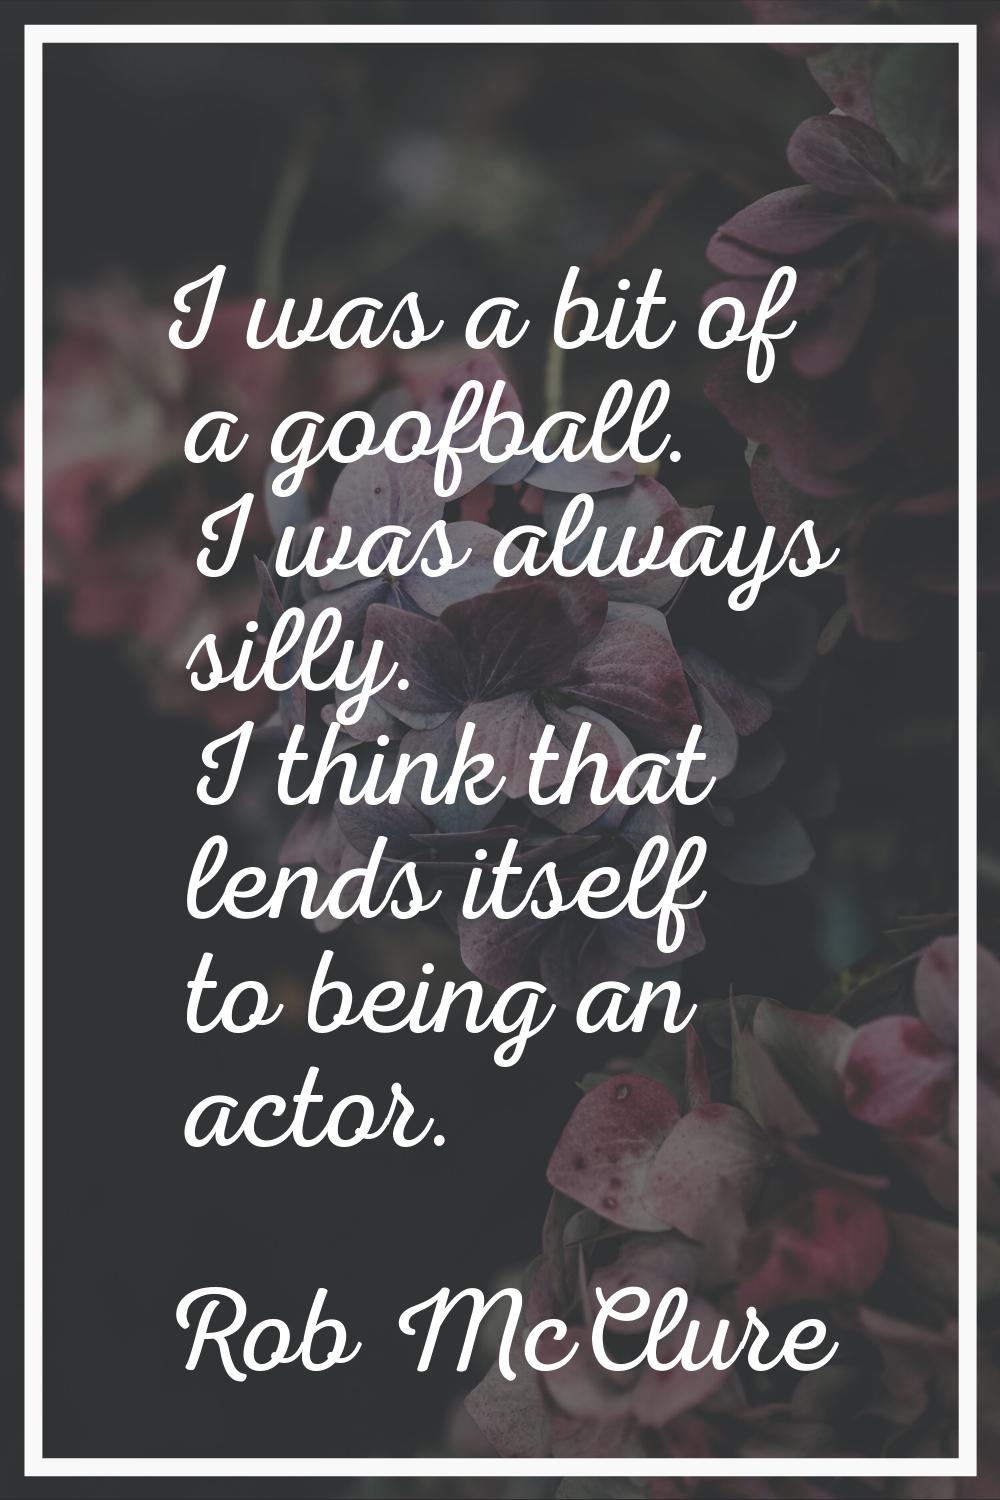 I was a bit of a goofball. I was always silly. I think that lends itself to being an actor.